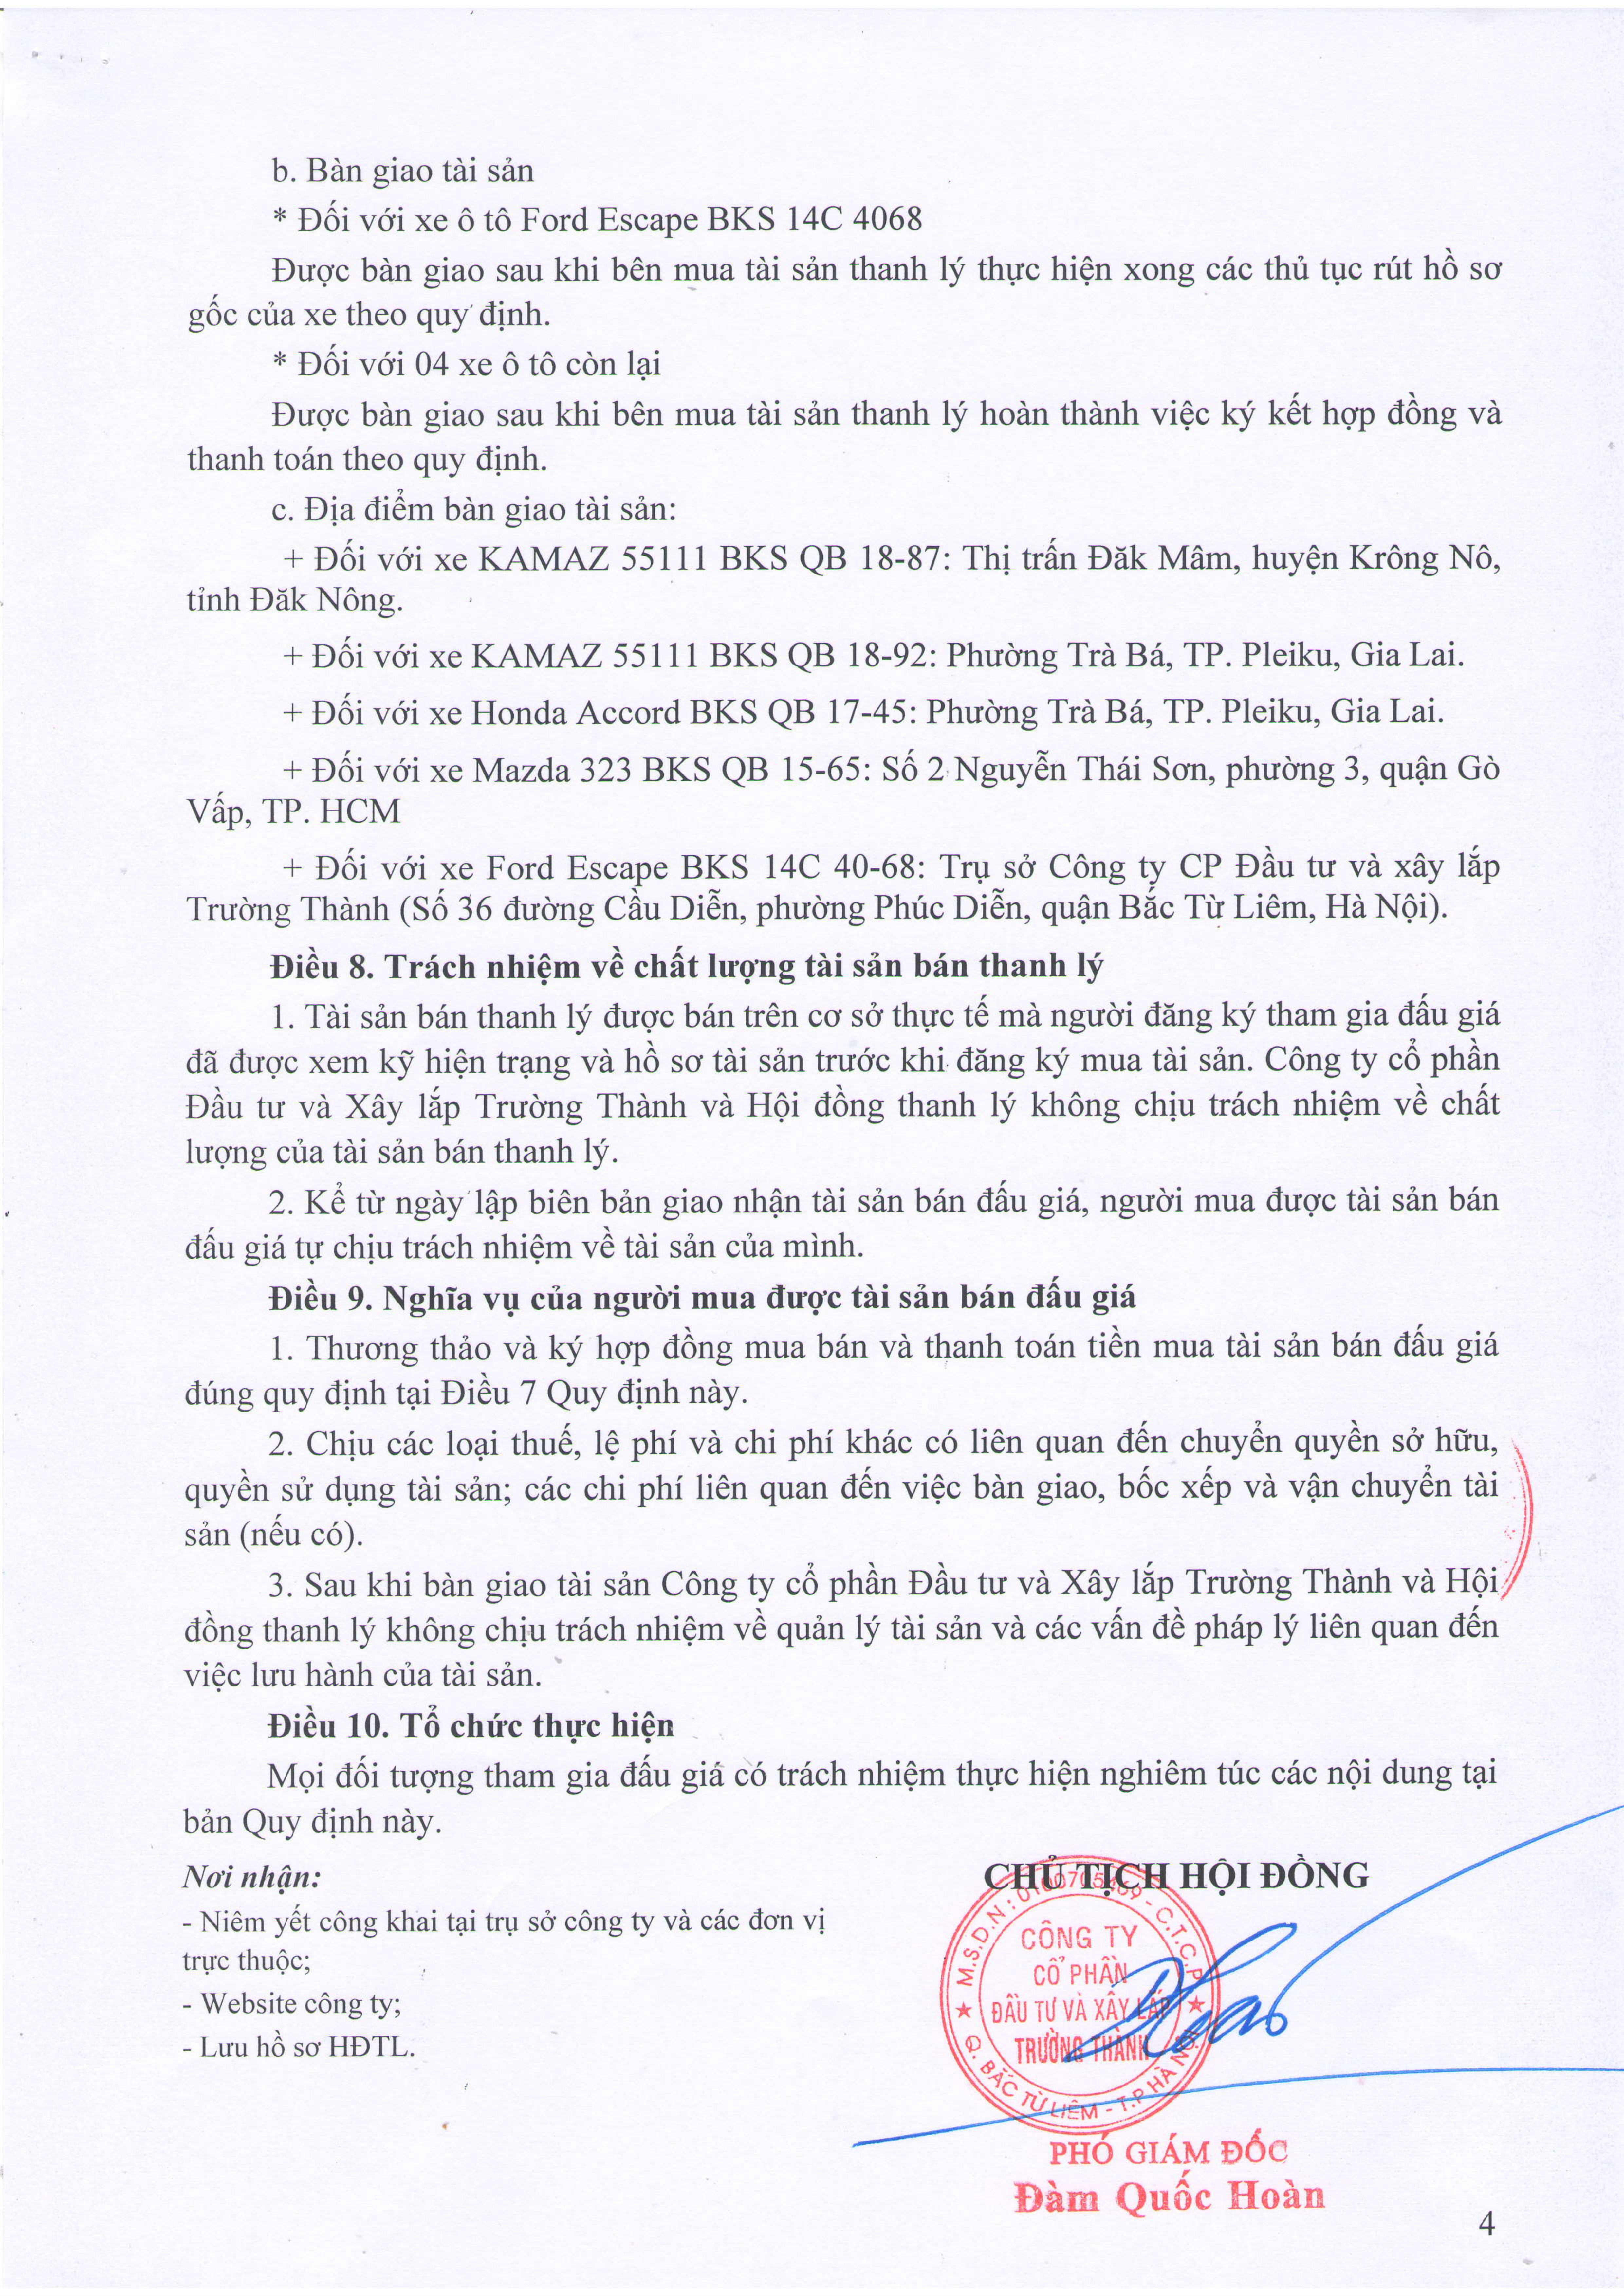 quy dinh ban dau gia thanh ly TSjpg_Page4